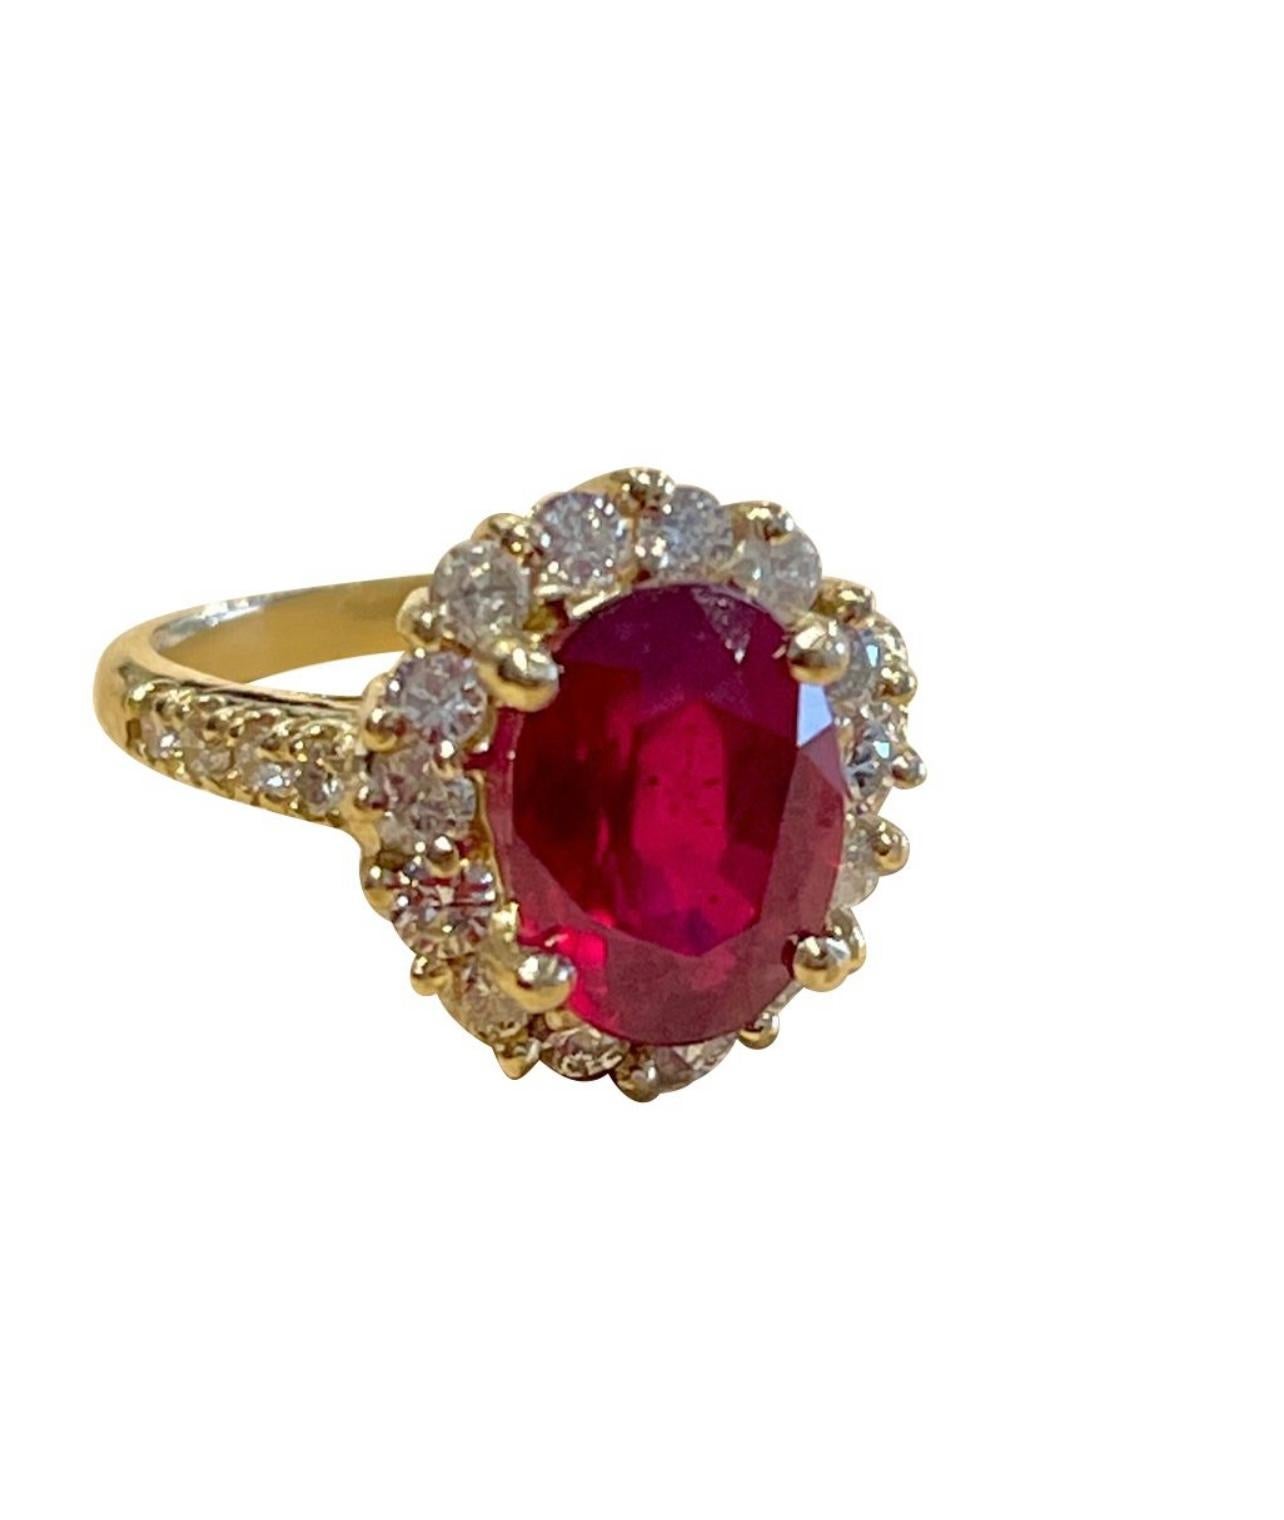 9X11  Oval Cut   Approximately 5  Carat Treated Ruby  14  Karat Yellow Gold Ring Size 6.5
Diamond Brilliant cut approximately 1.25 ct , Very Nice quality of diamonds. Diamonds all around the stone and on the band too
Its a treated ruby prong set
14